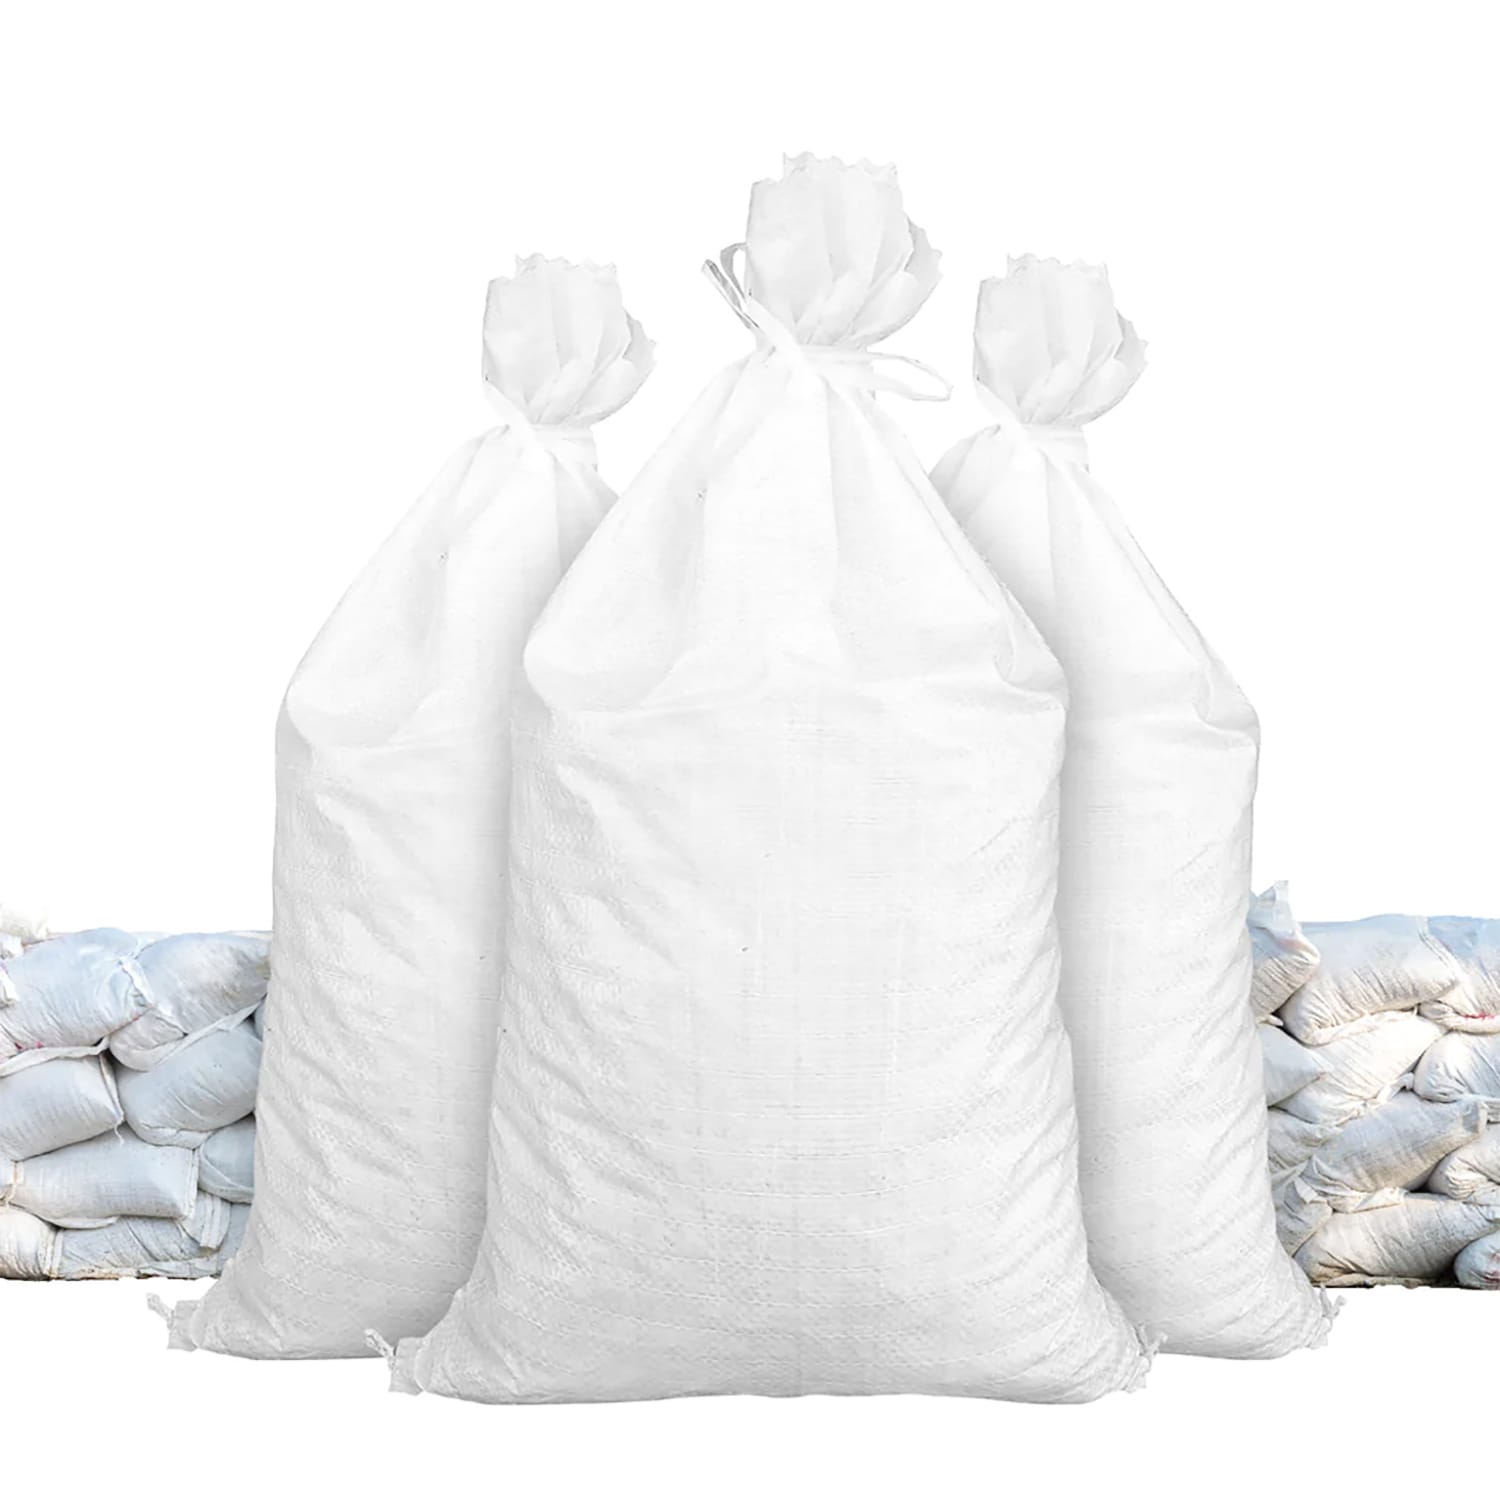 10 Pack Relarr Sand Bags 14 x 26 Empty White Woven Polypropylene Sandbags Ties Included 